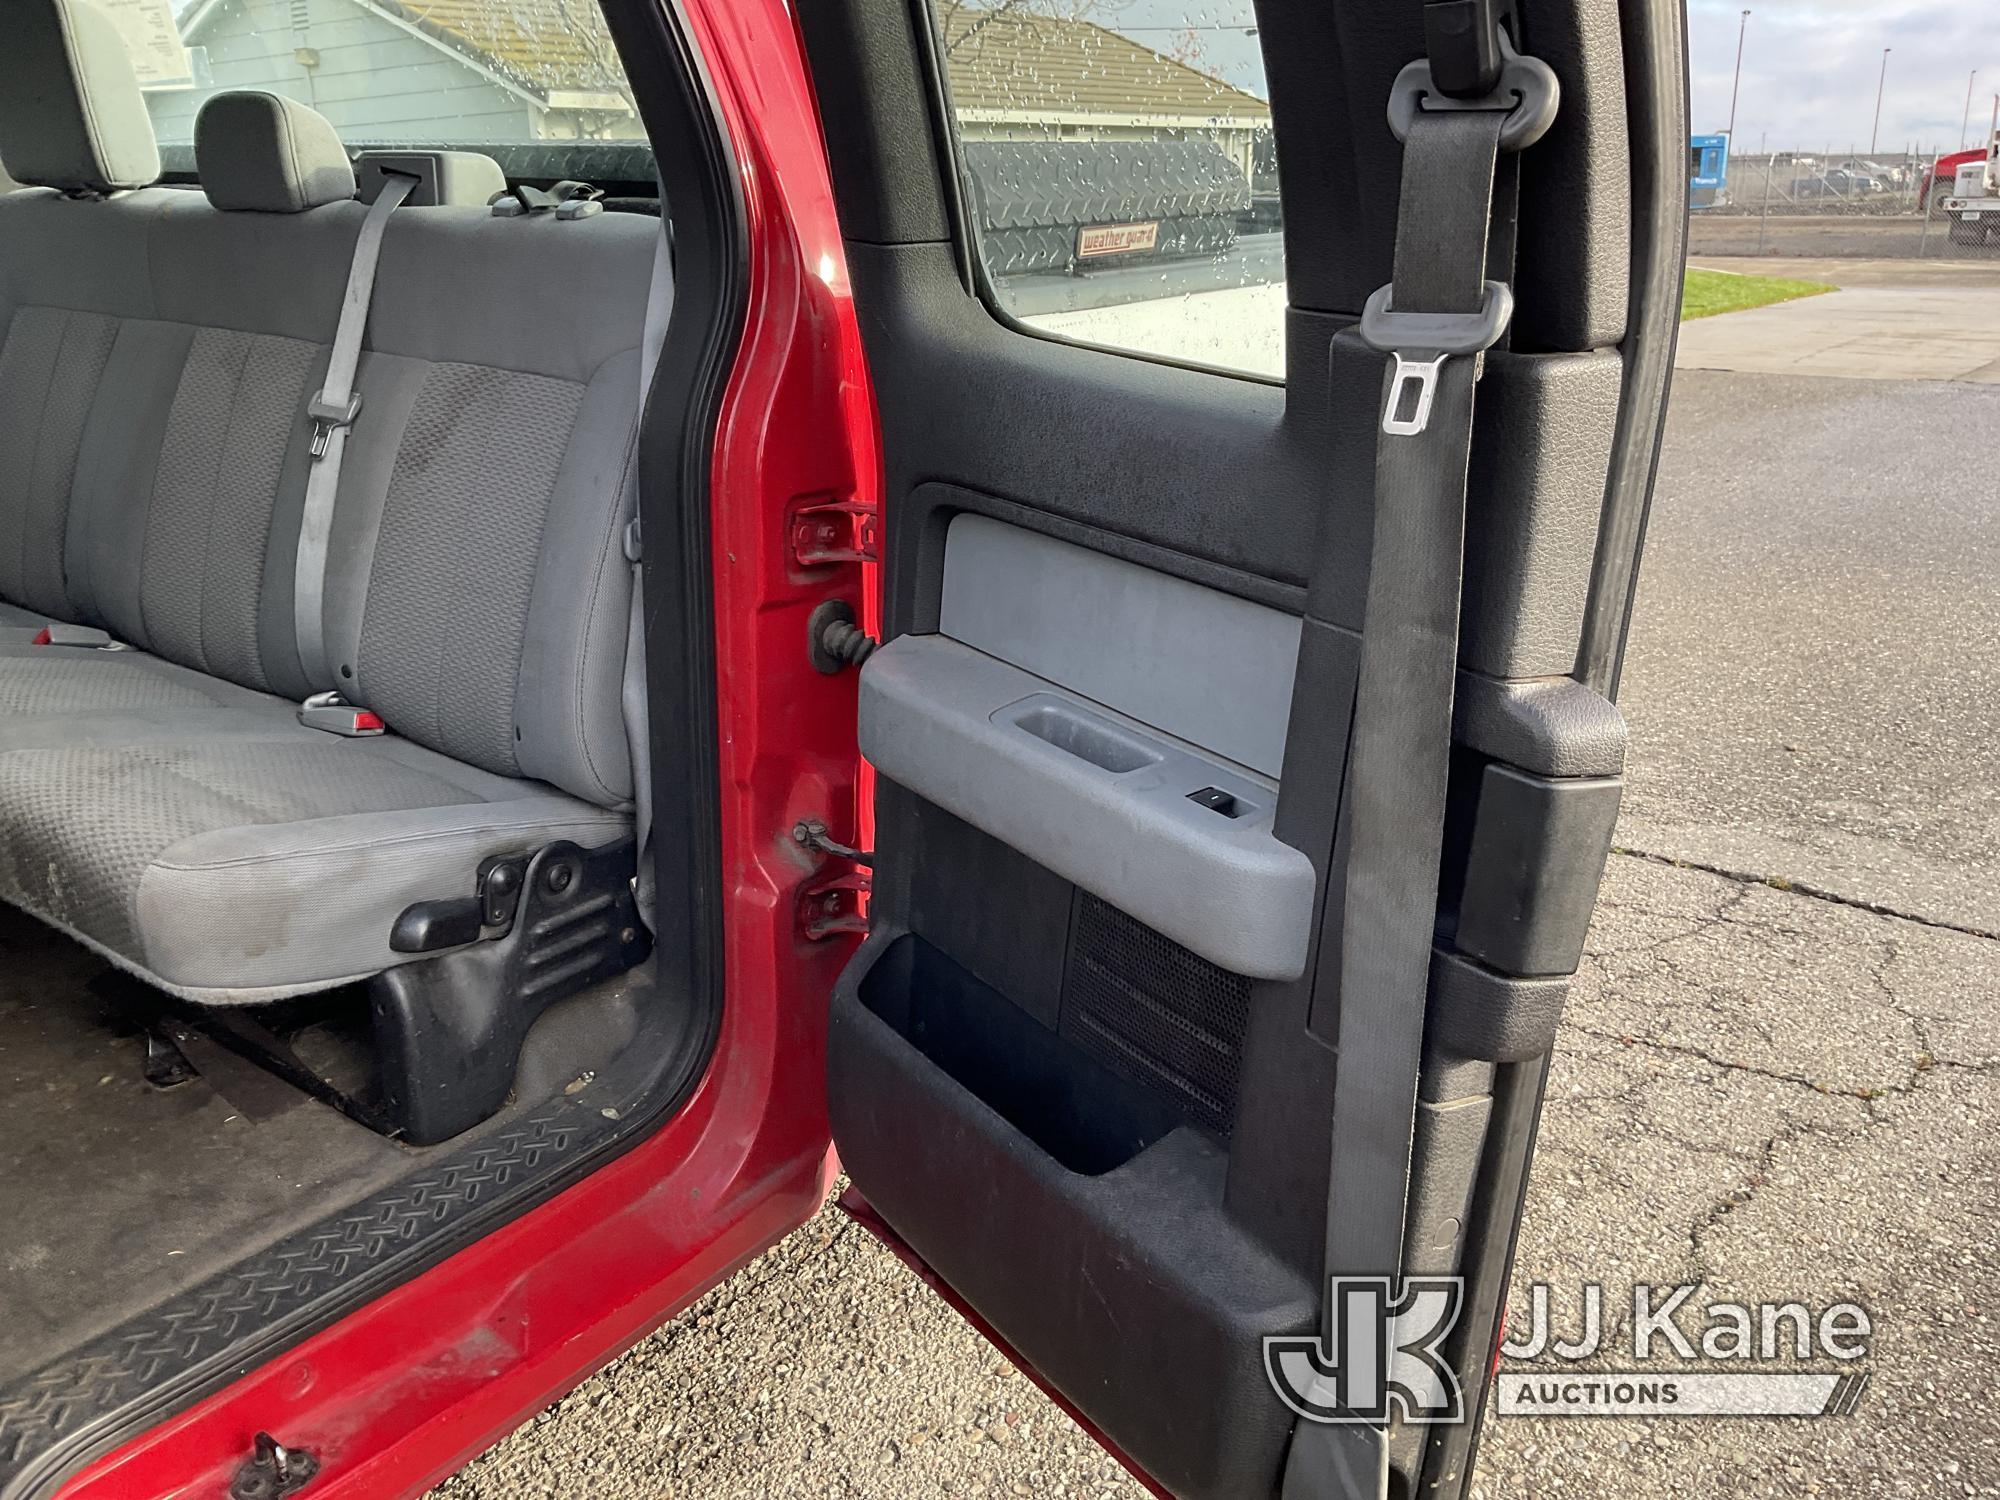 (Dixon, CA) 2014 Ford F150 Extended-Cab Pickup Truck, Lot D5289 Runs & Moves, Passenger Side Damaged